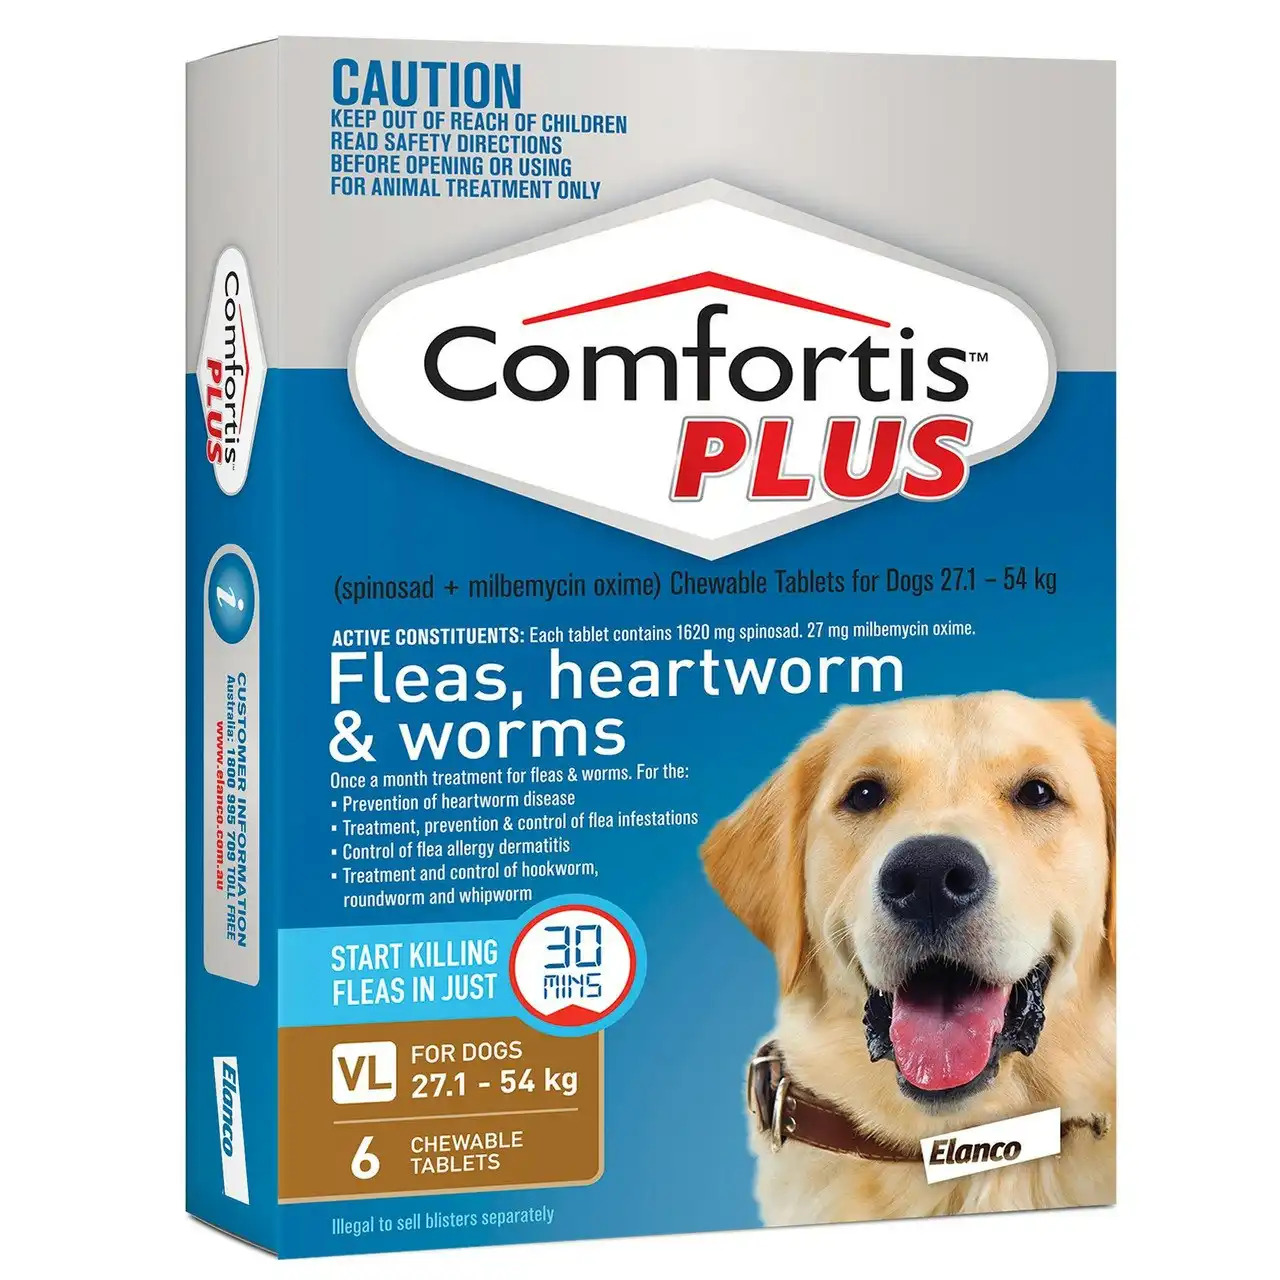 Comfortis(TM) PLUS Fleas, Heartworm & Worms for Dogs 27.1 - 54kg - 6 Pack